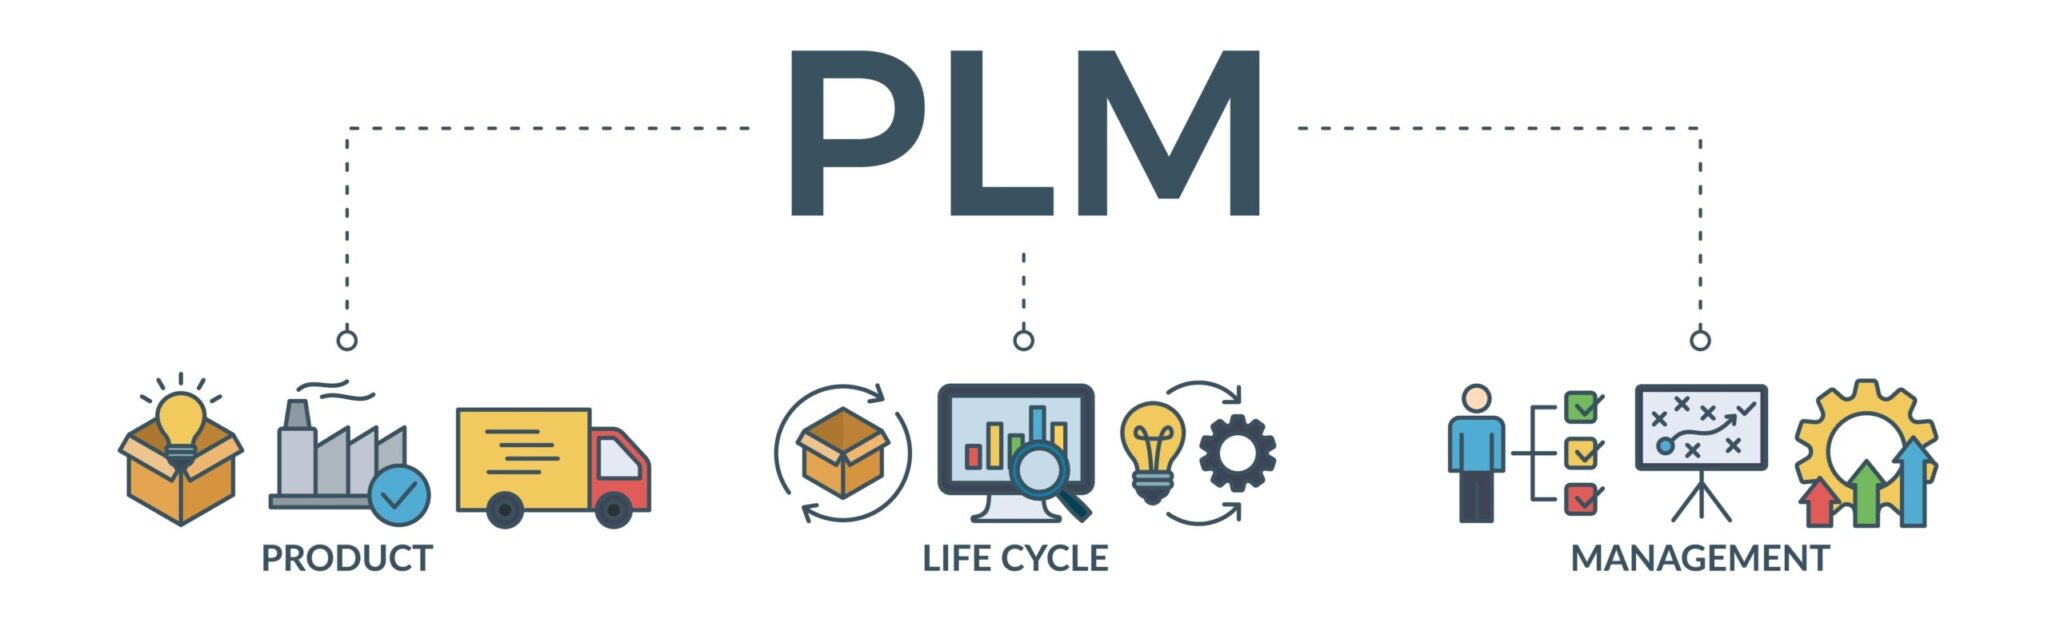 Complete guide to PLM software and process